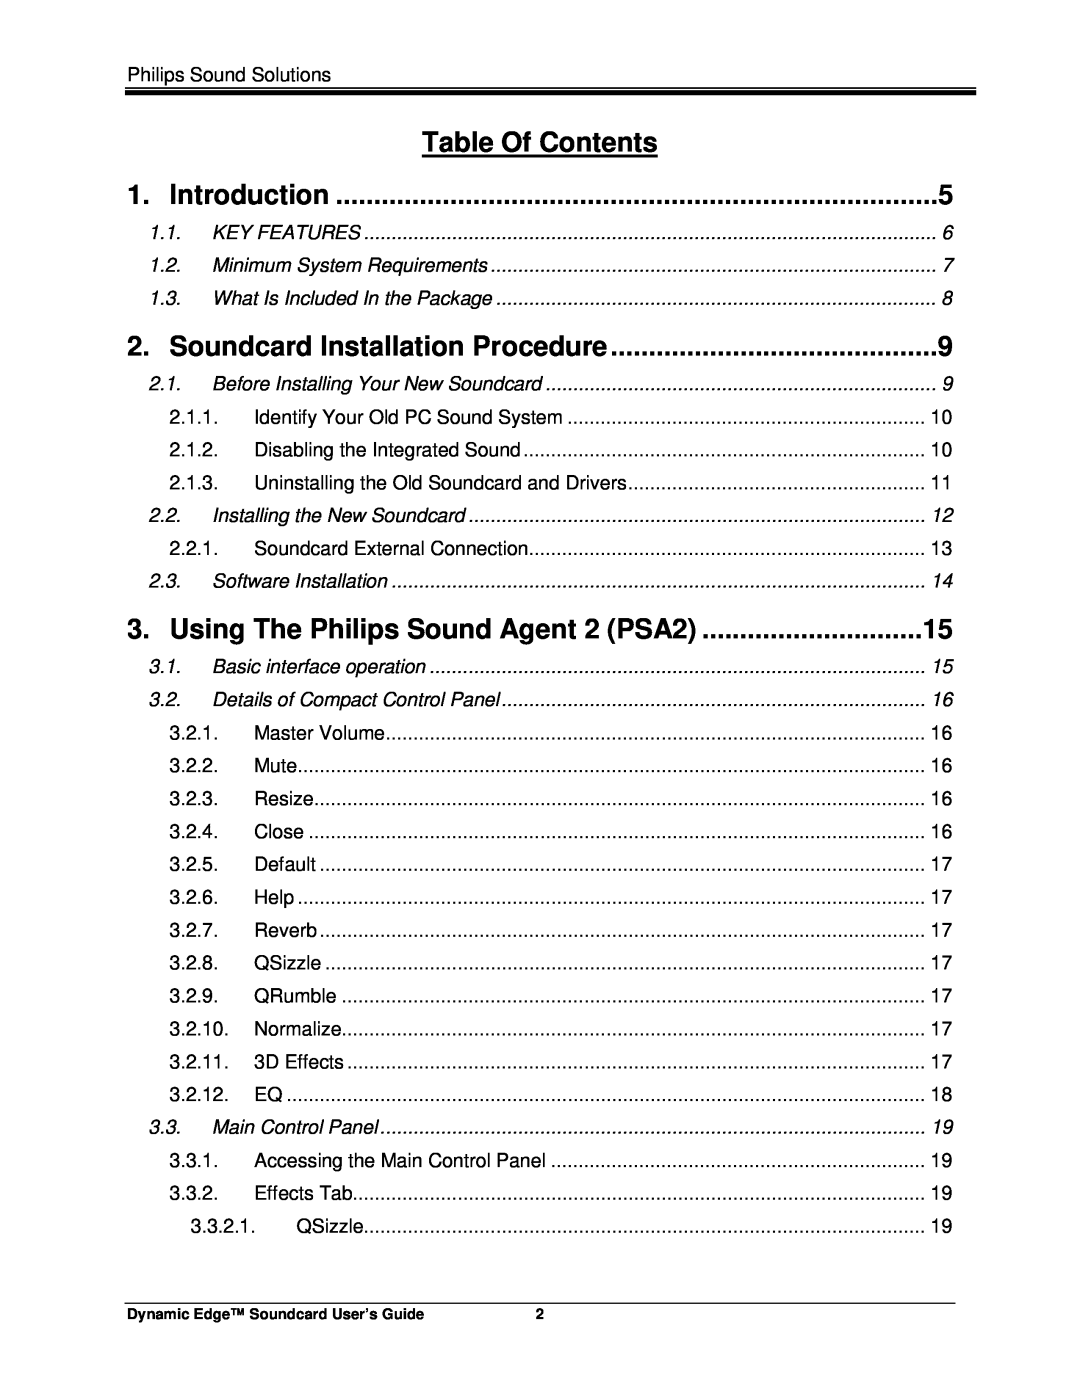 Philips PSC604 Introduction, Table Of Contents, Soundcard Installation Procedure, Using The Philips Sound Agent 2 PSA2 